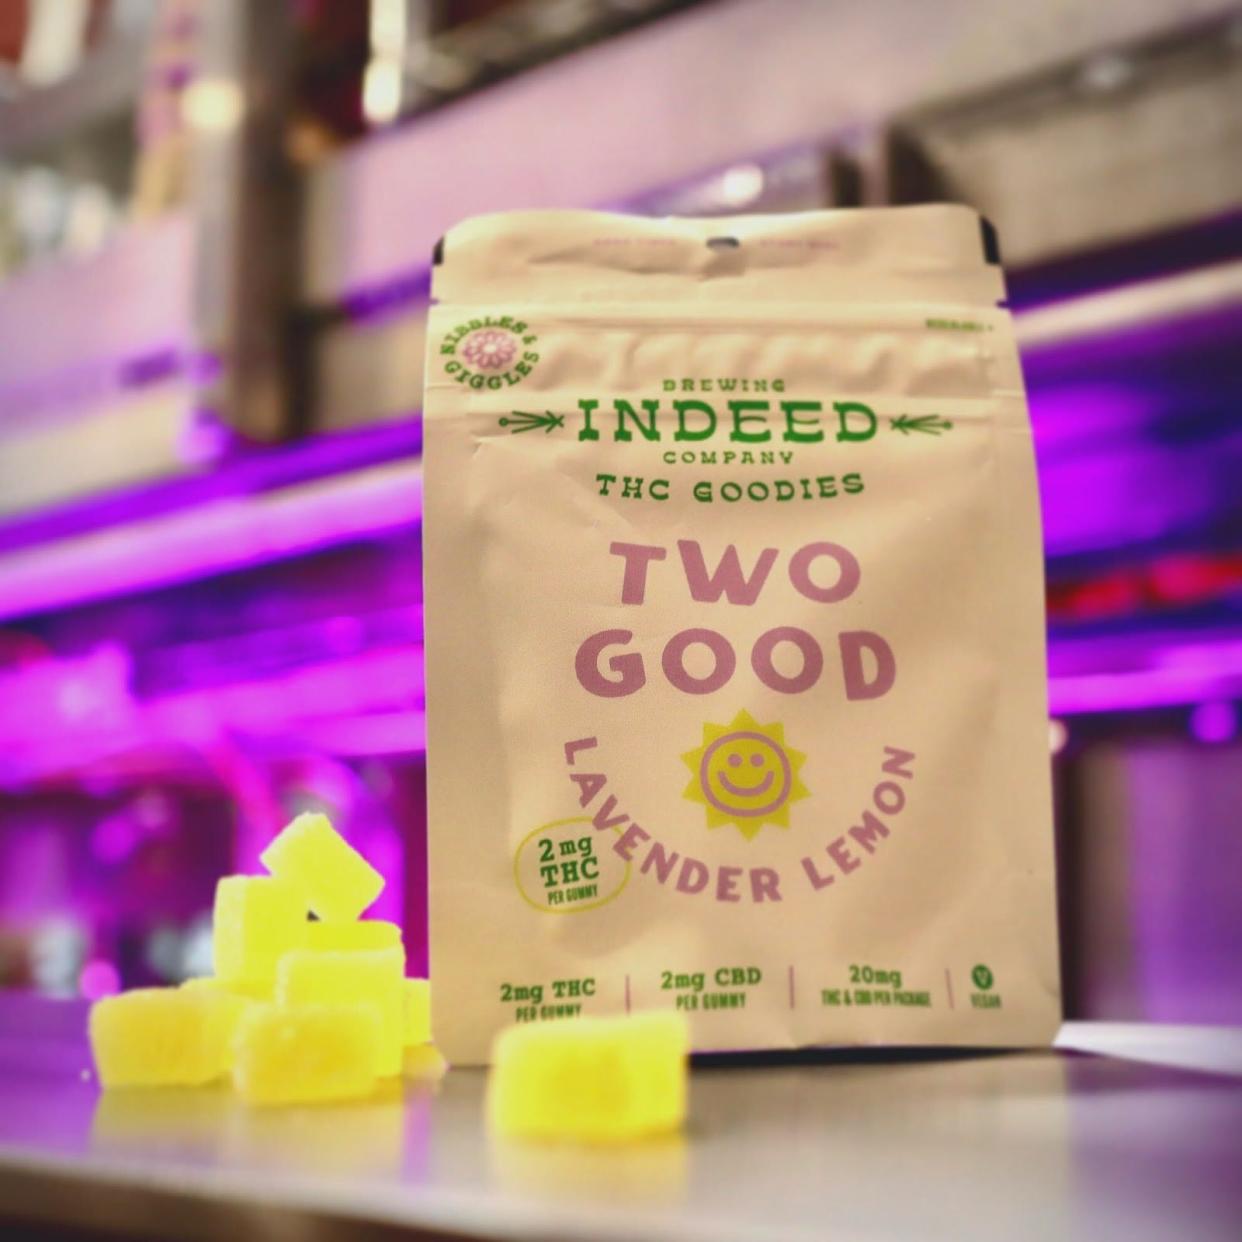 Two Good THC Goodies are lavender lemon gummies infused with hemp-derived THC available at Indeed Brewing Co., 530 S. 2nd St., Milwaukee.